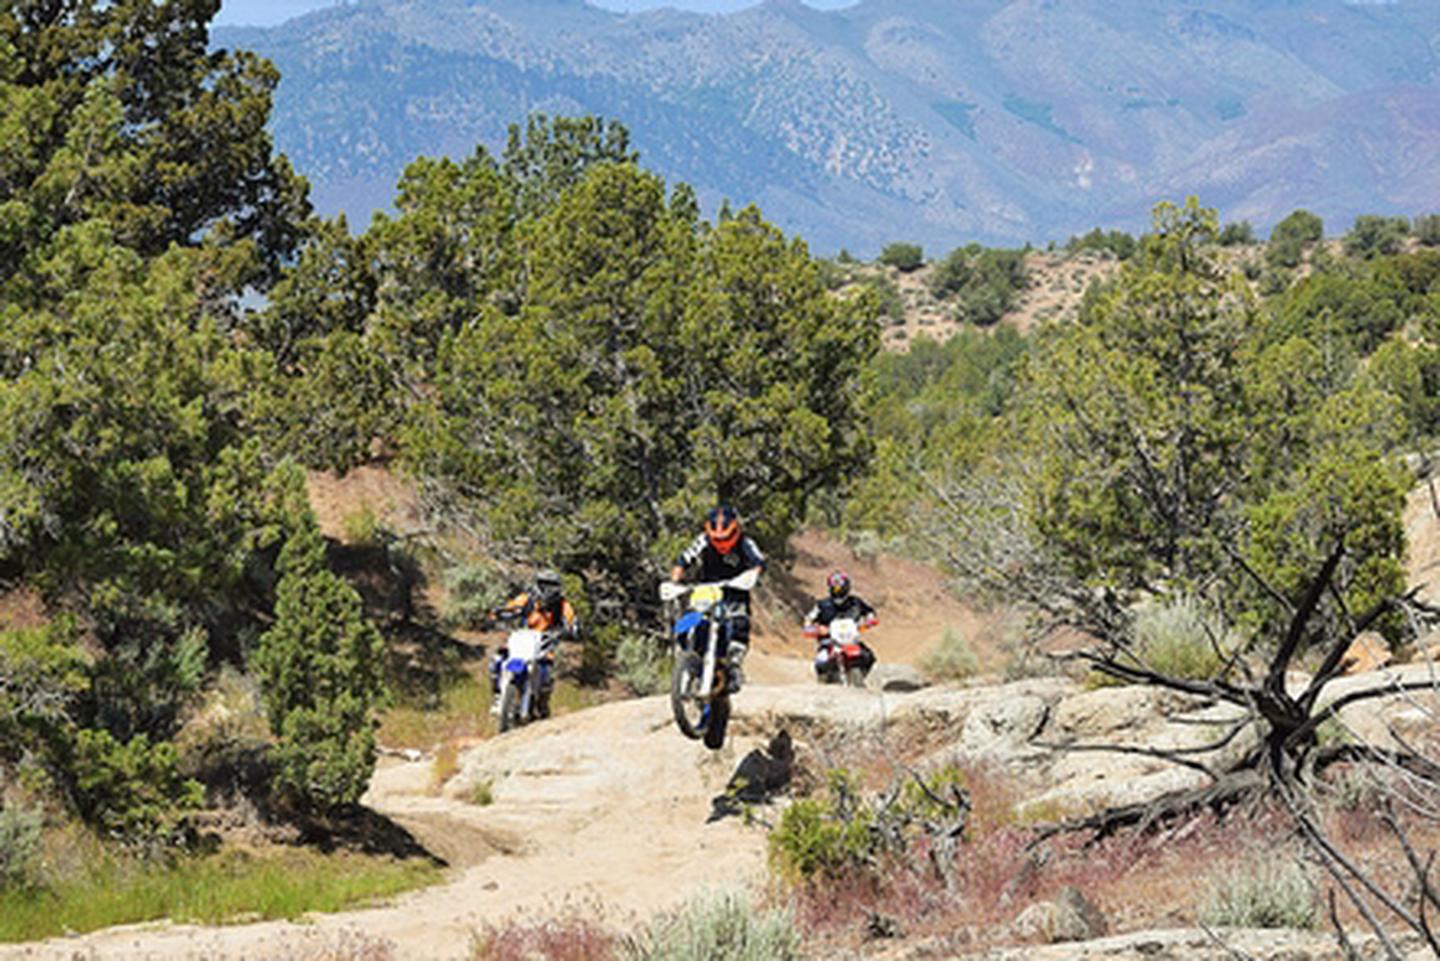 Fort Sage OHV Area Photo of Riders on Trail 15